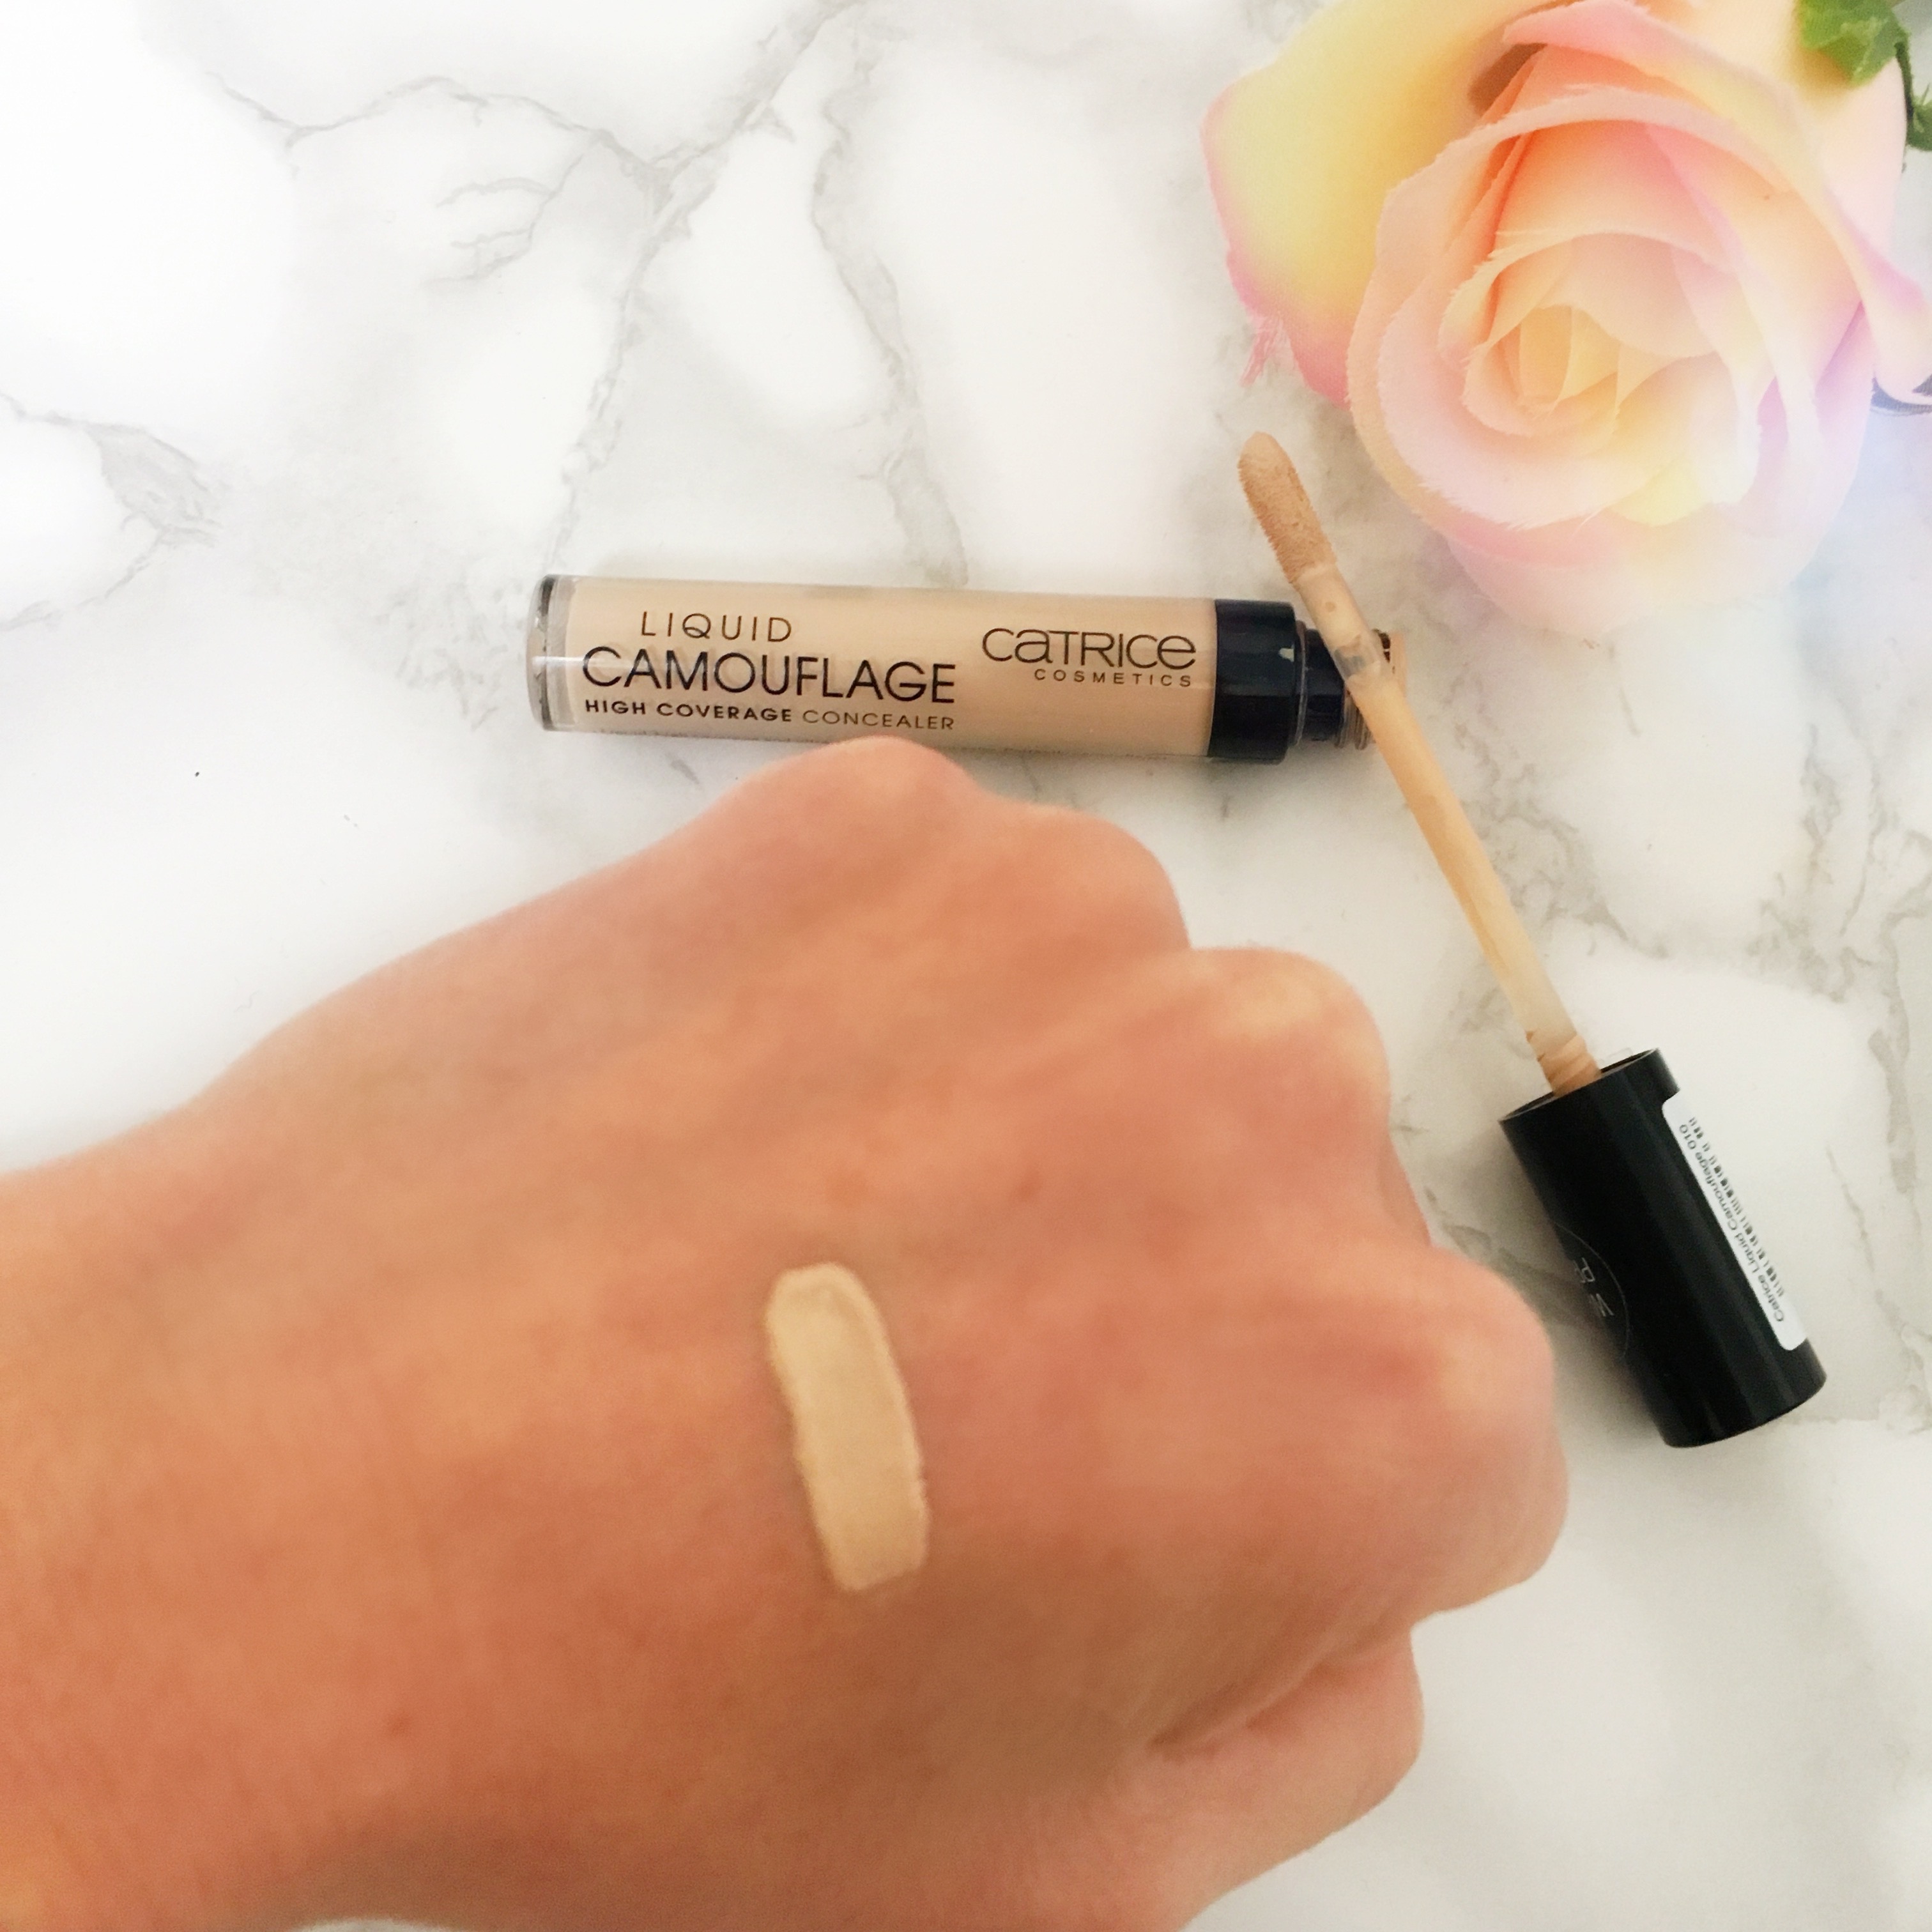 The Cruelty Free Columns Kari from - Liquid Camouflage by Concealer Catrice